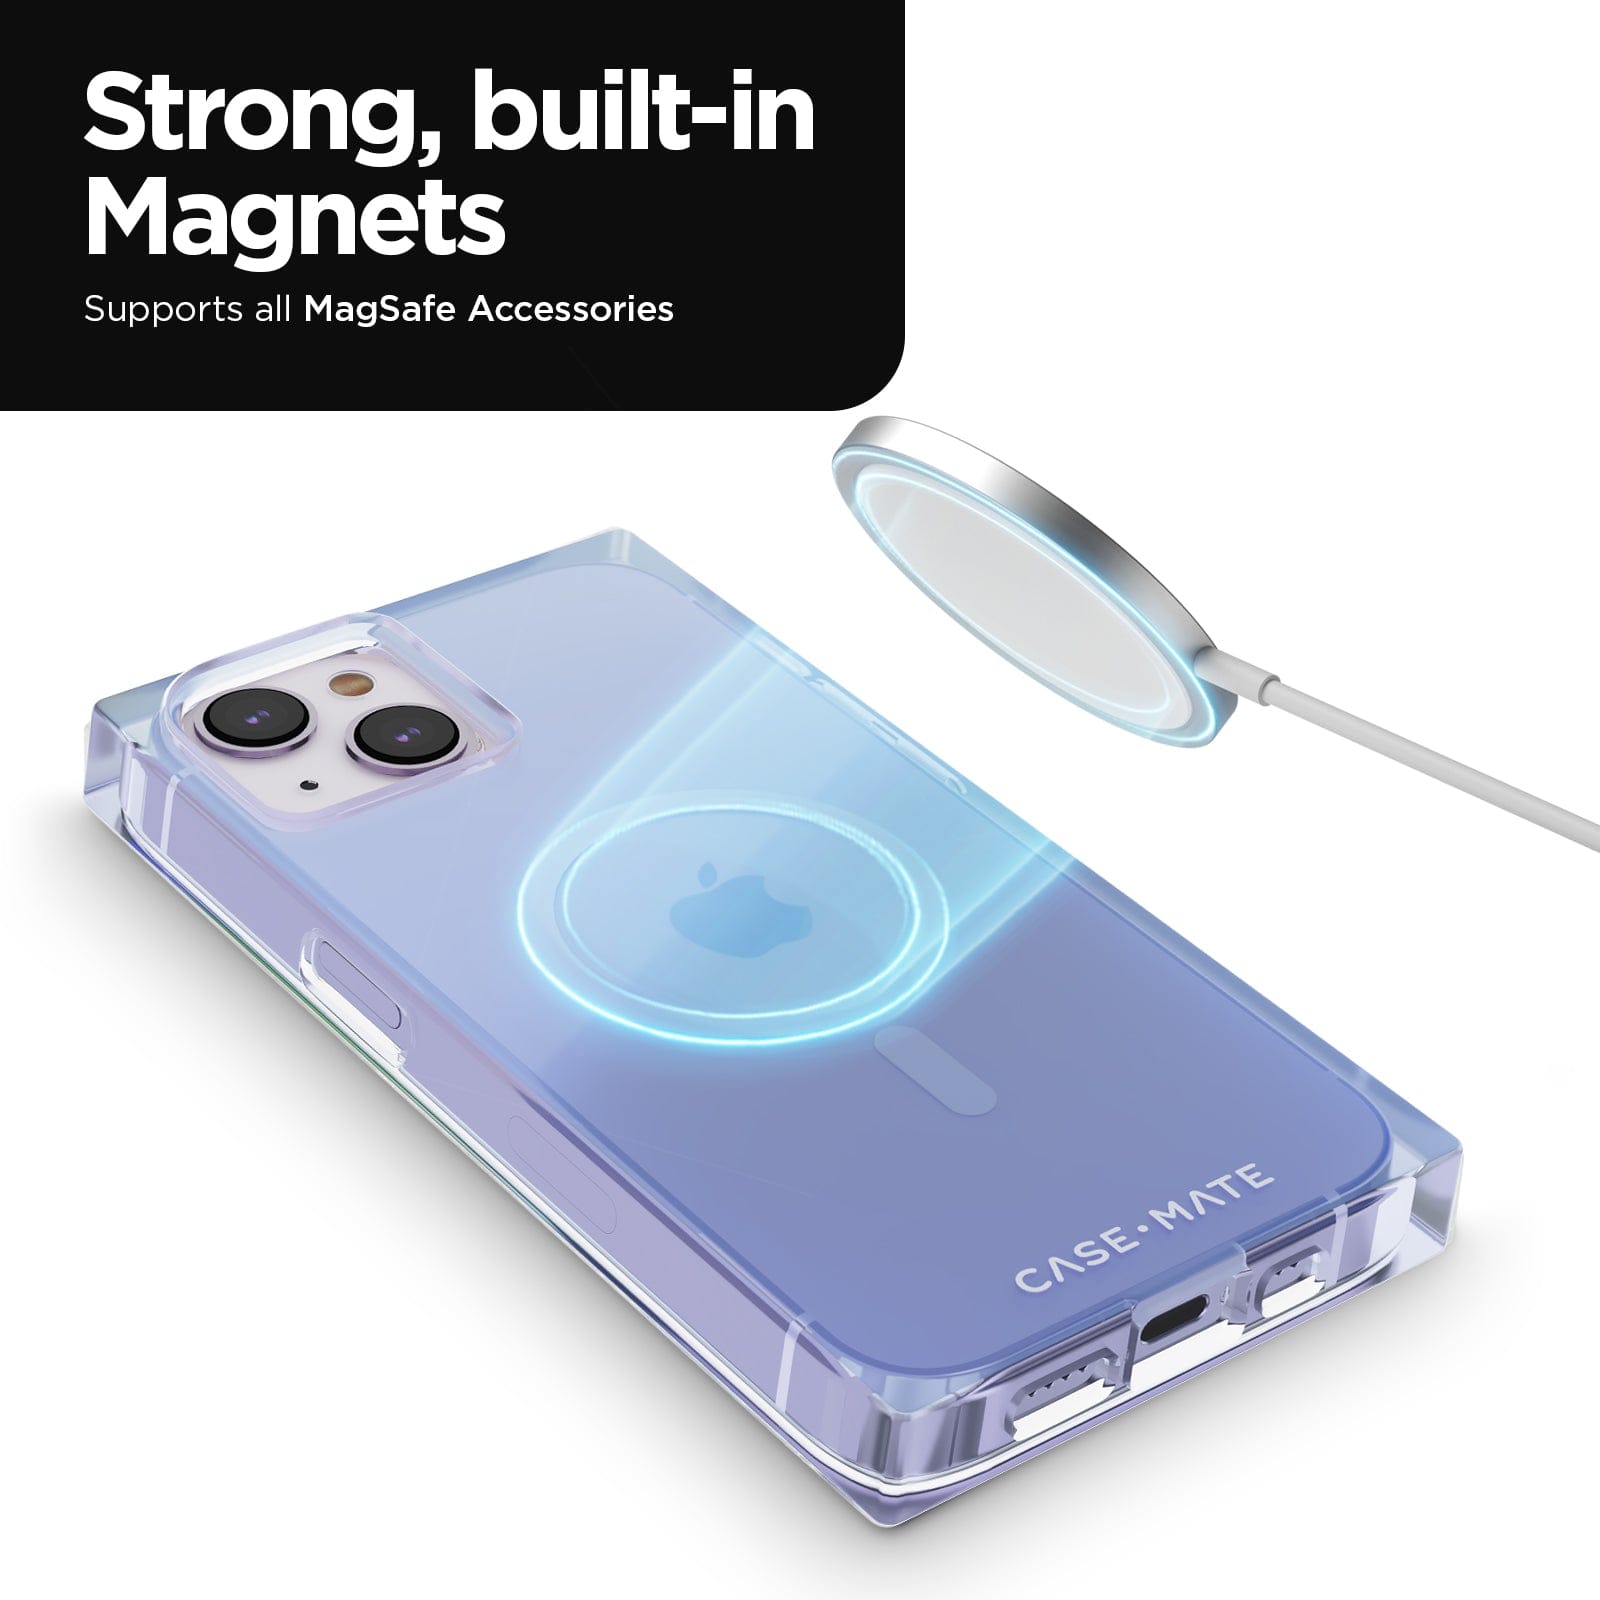 STORNG, BUILT-IN MAGNETS SUPPORT ALL MAGSAFE ACCESSORIES 